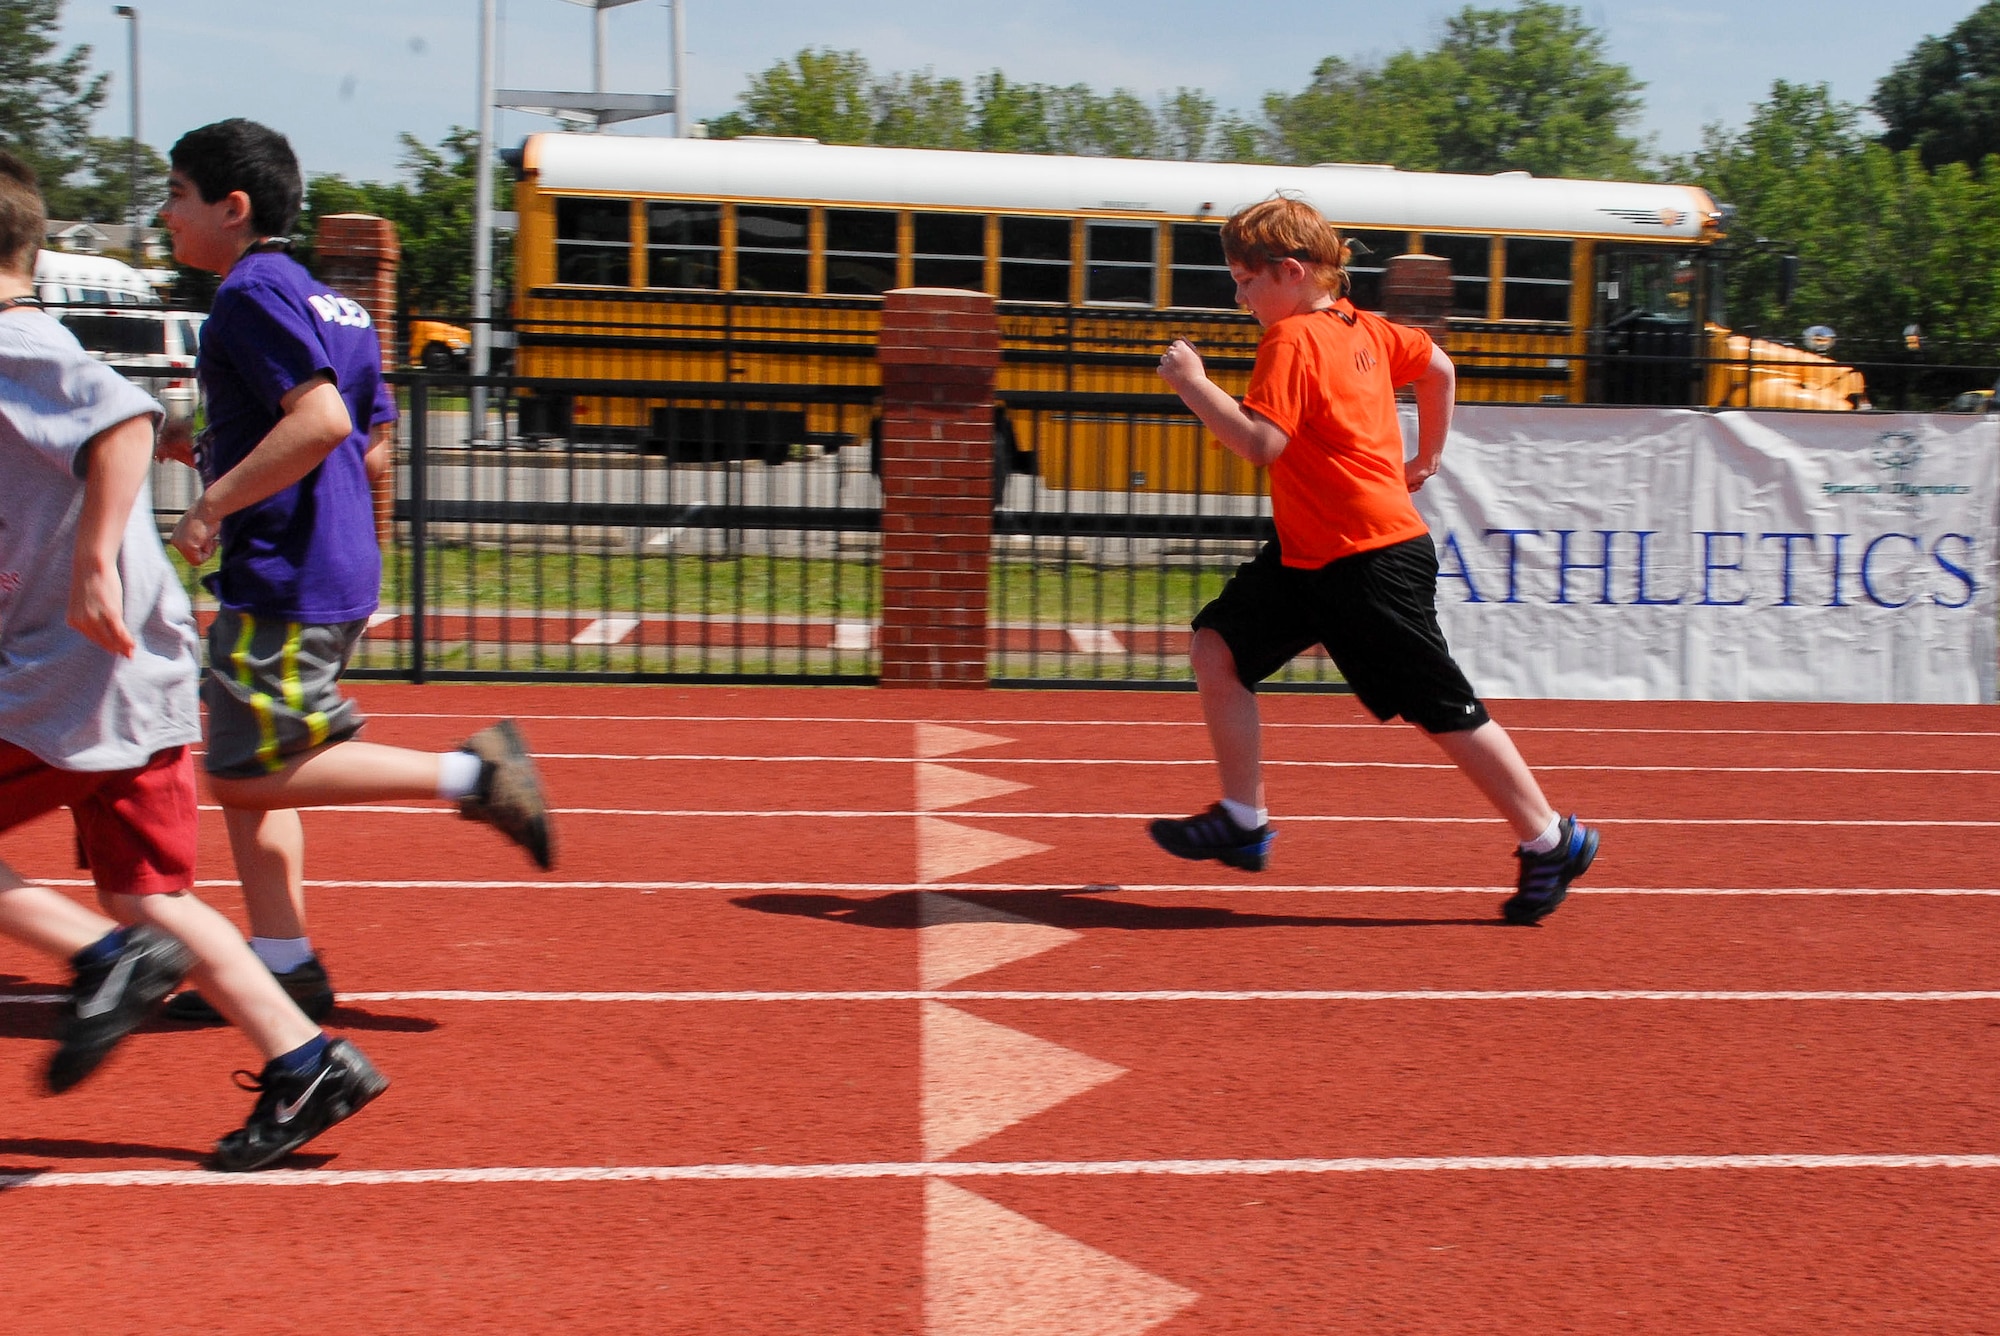 Cody Anderson, son of Tech. Sgt. Philip Anderson and Kiley Anderson, runs in the 100 meter dash May 25, 2013, at the 2013 Arkansas Summer Special Olympics May 25, 2013, at Harding University in Searcy, Ark. Anderson, diagnosed with Asperger’s syndrome, competed in two events at the Olympics. (U.S. Air Force photo by Staff Sgt. Jacob Barreiro)